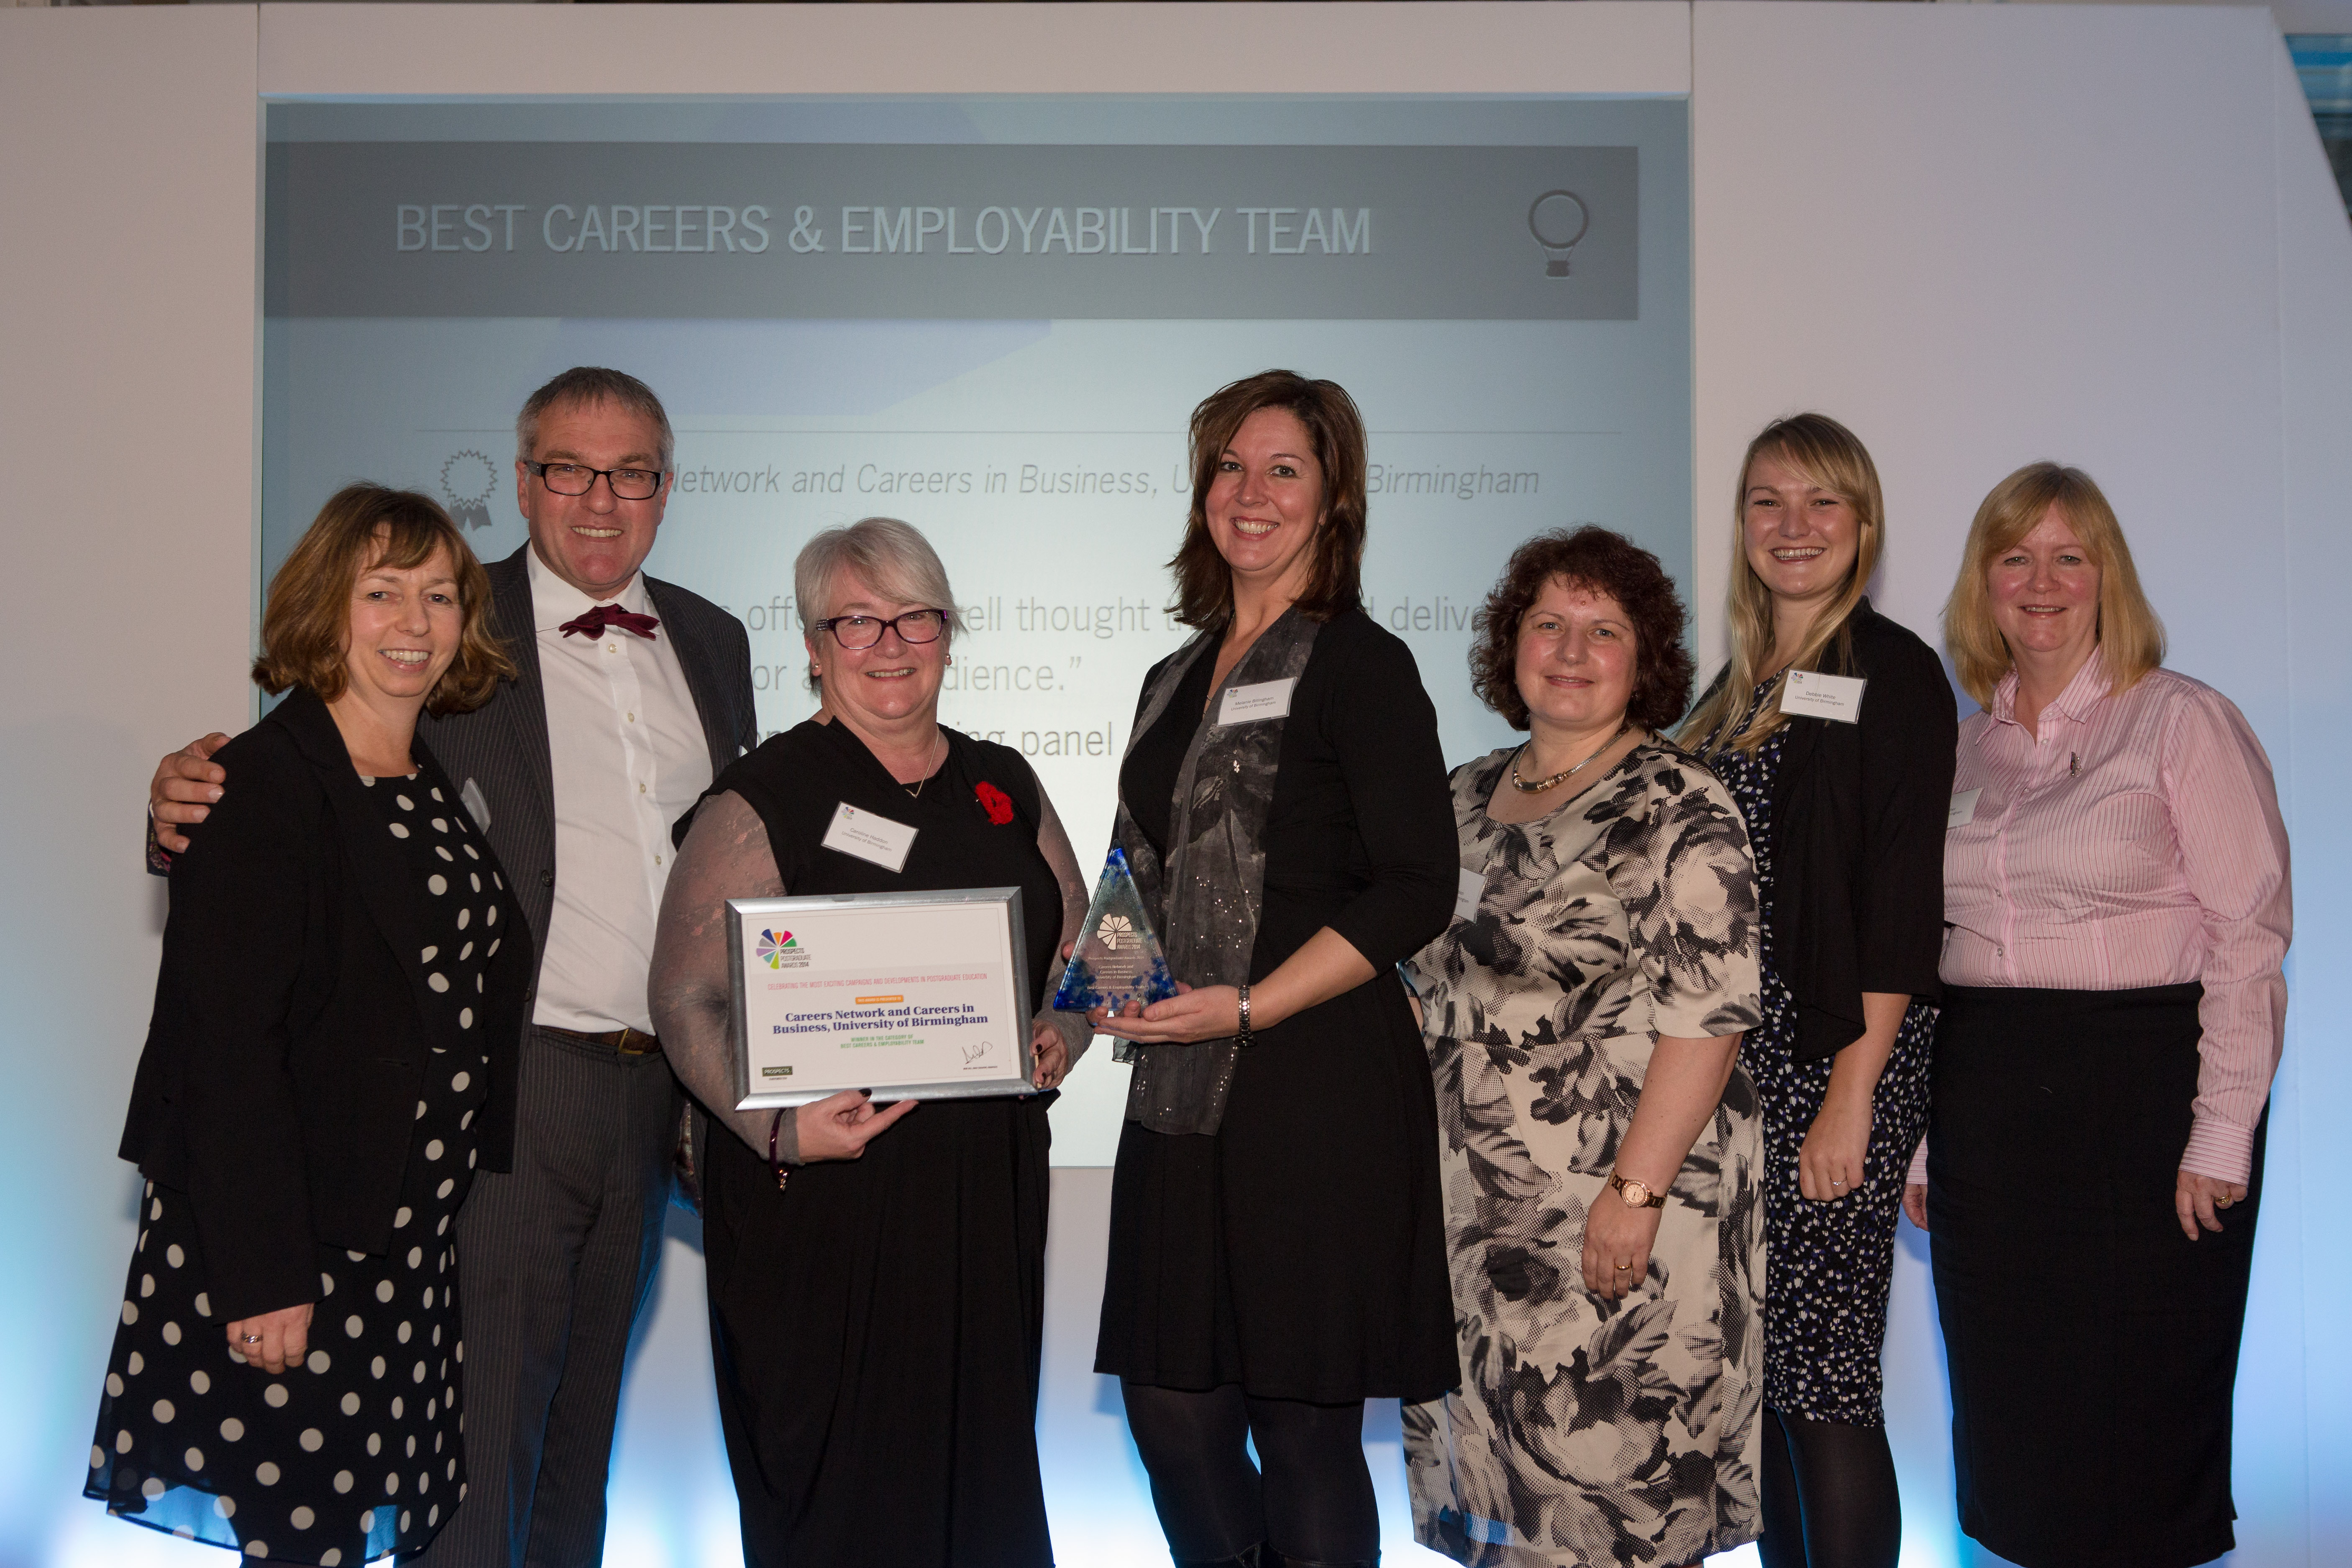 Careers in Business team receiving the 2014 Prospects Postgraduate award